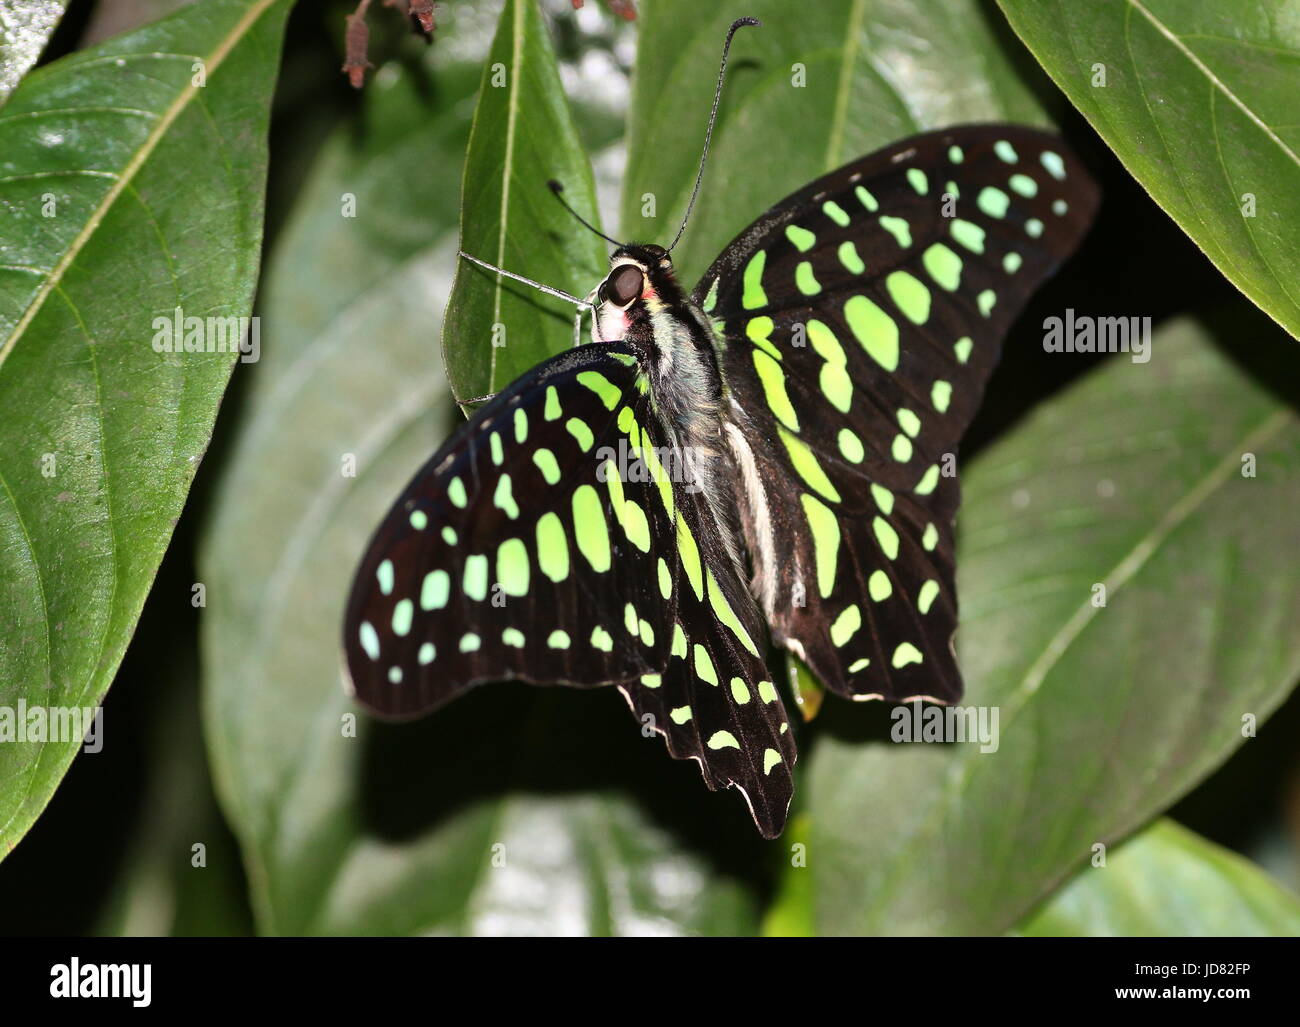 Queue d'Asie du Sud Green Jay Butterfly (Graphium agamemnon) alias Triangle vert ou vert-spotted Triangle. Banque D'Images